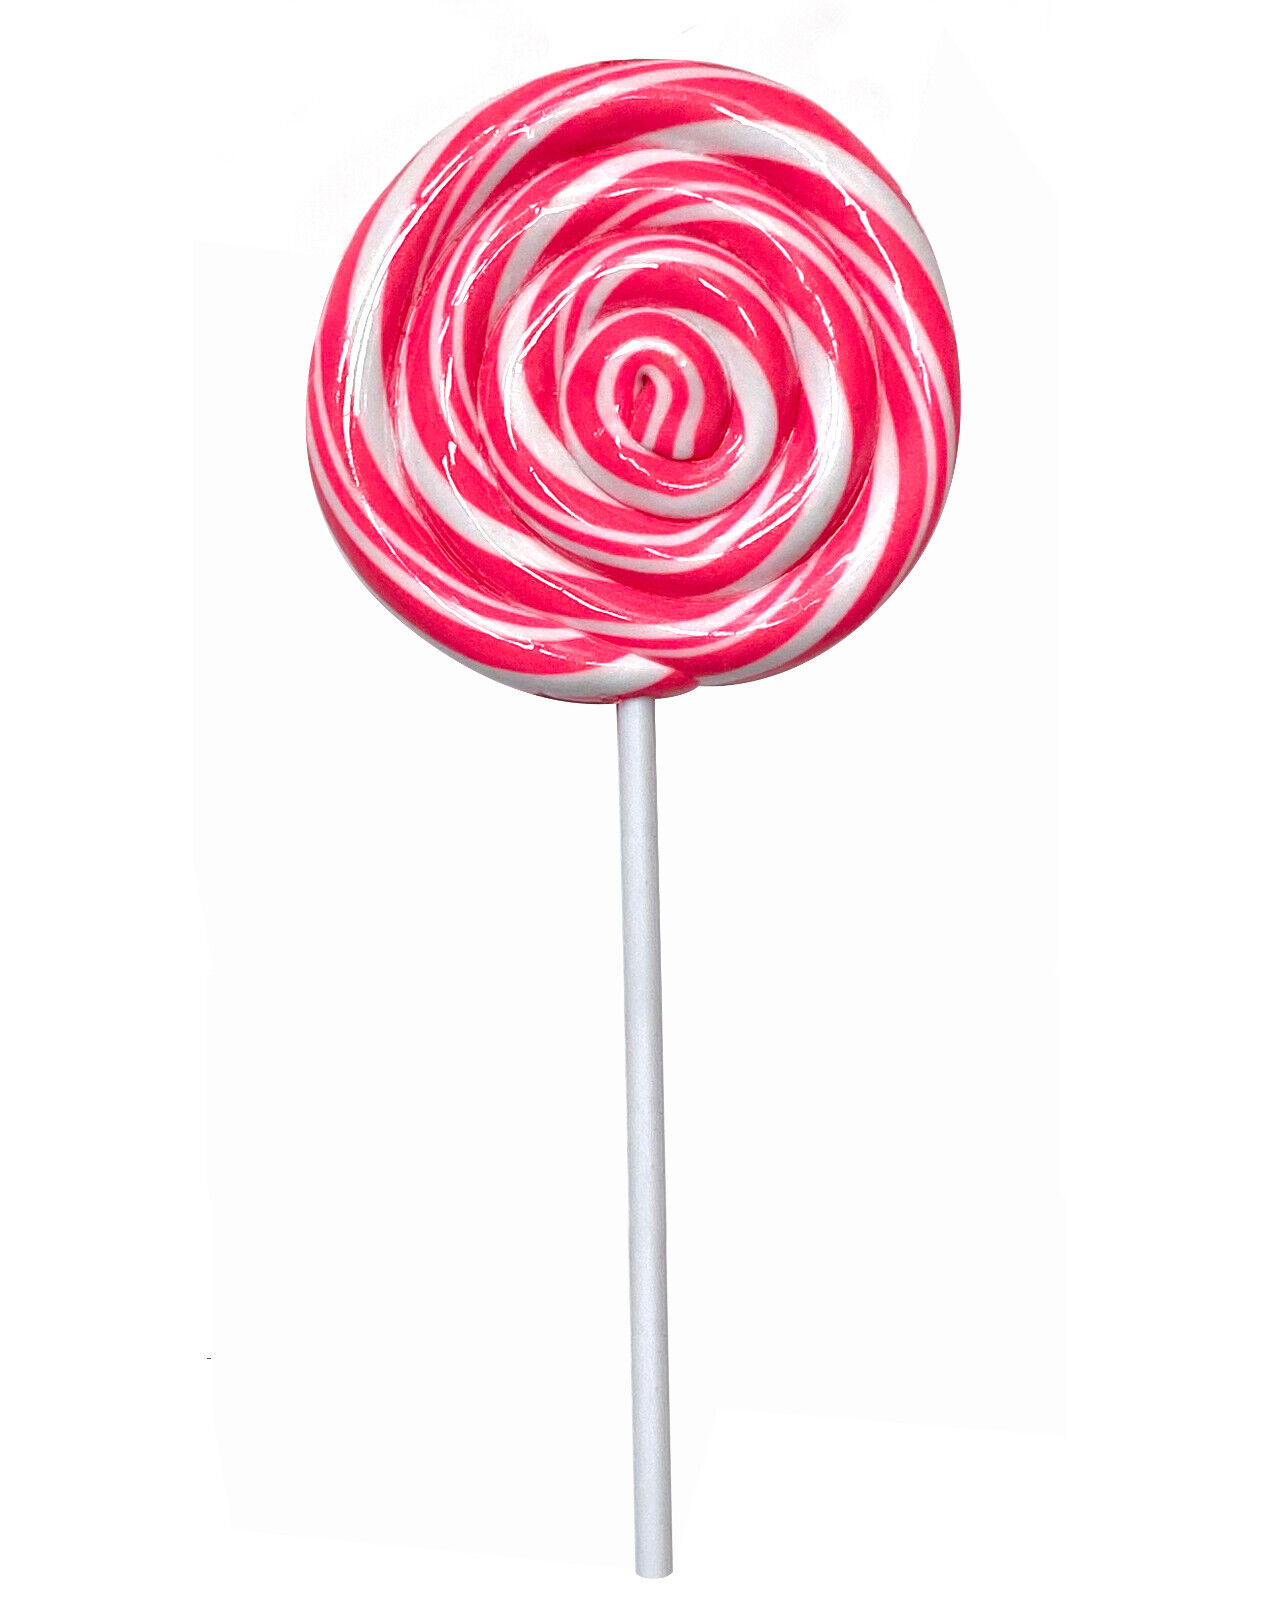 BRIGHT PINK LOLLIPOP PROP | Christmas Candy Birthday Party Decorations Fake Bake